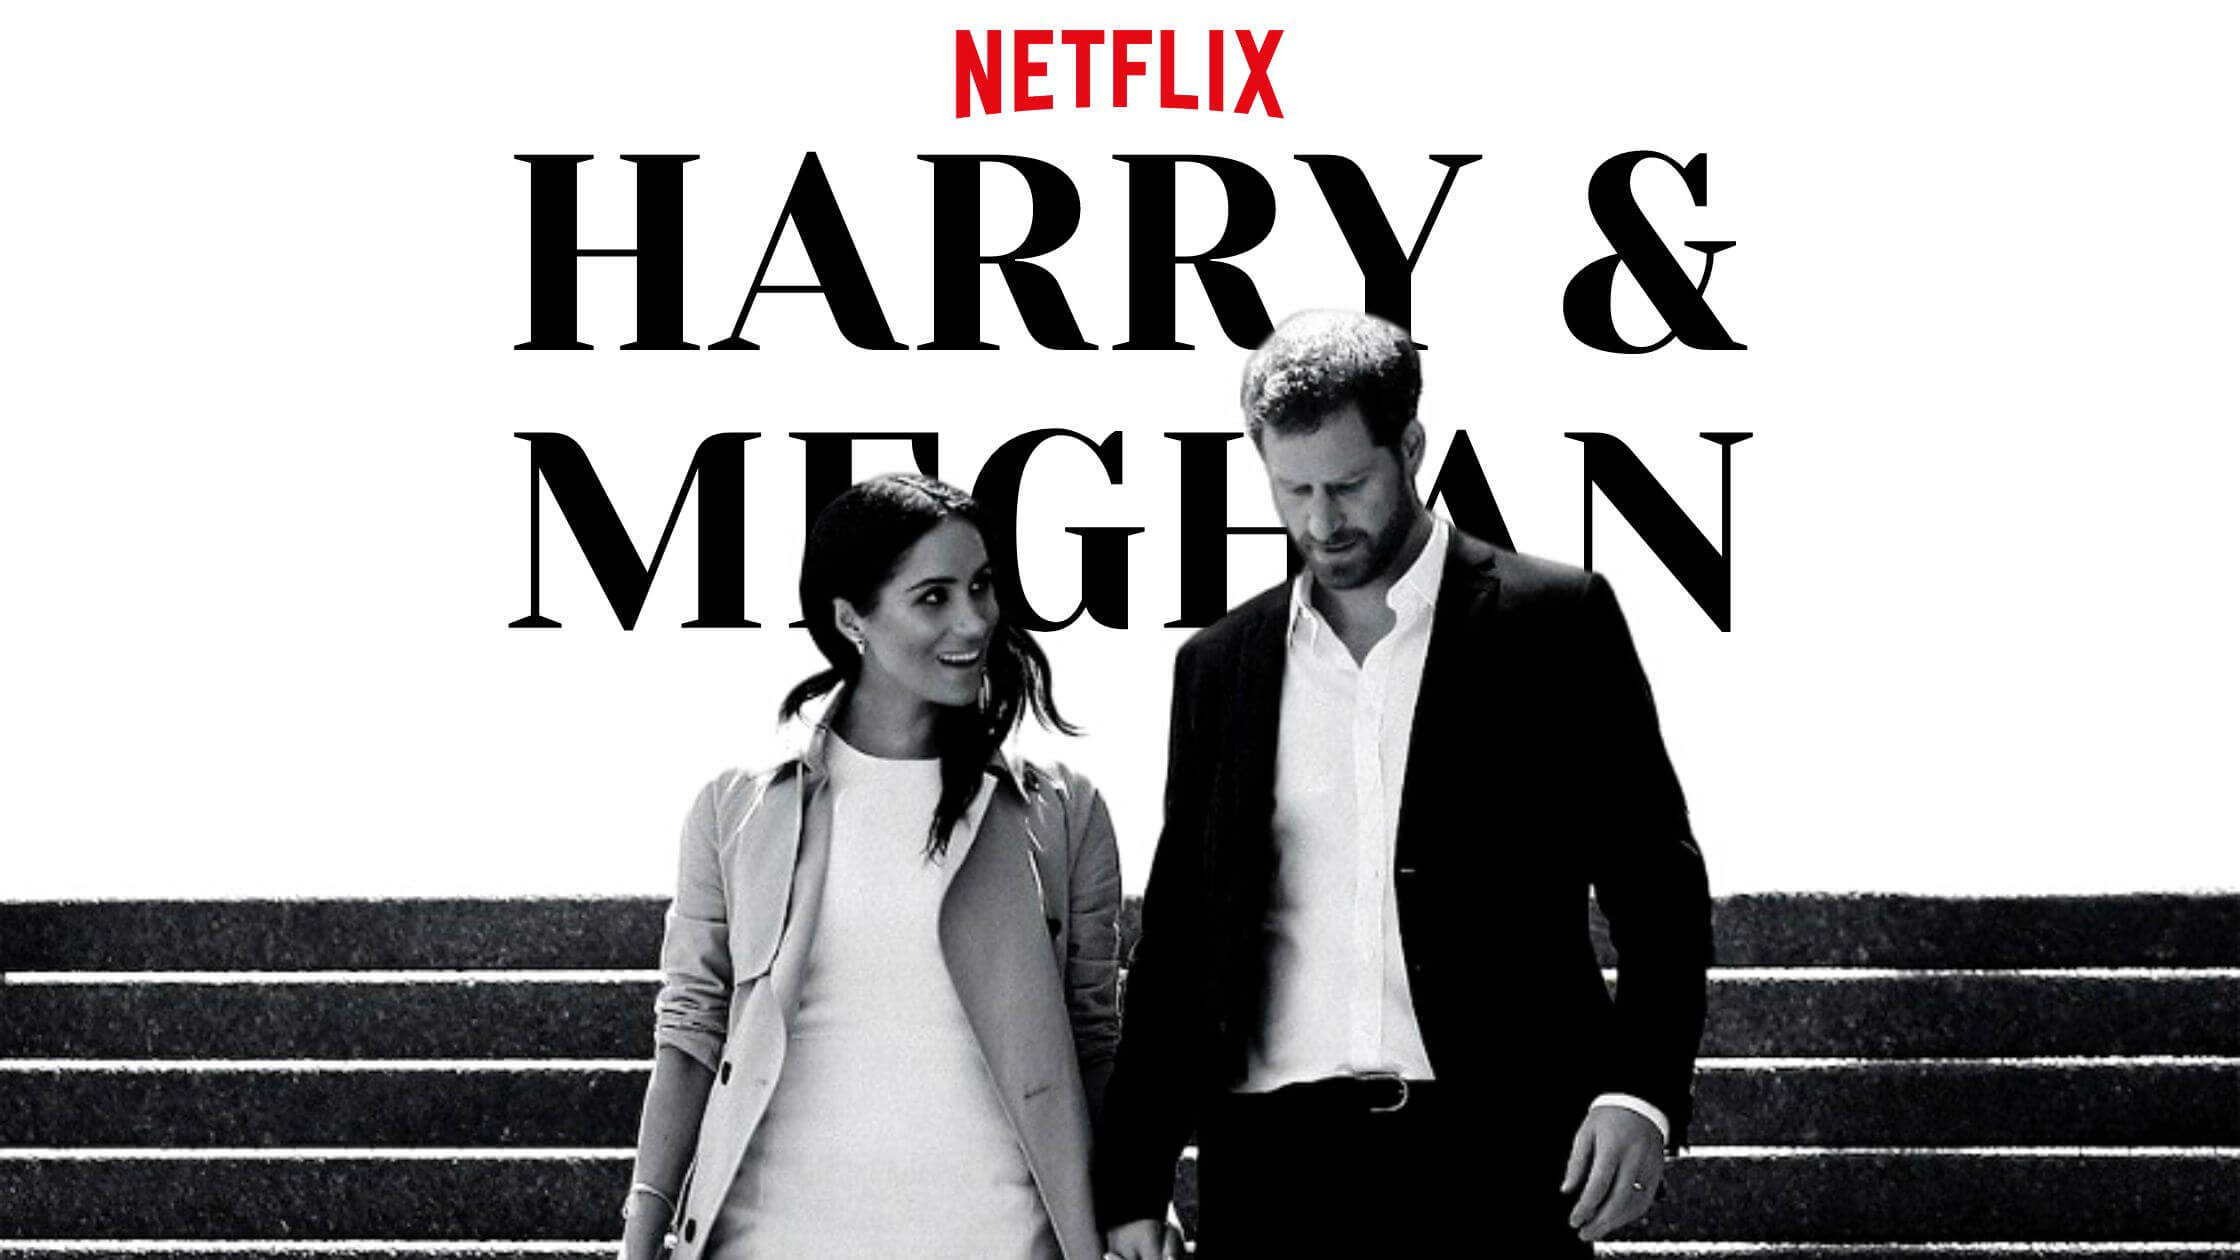 People's Reactions To The Netflix Series Harry & Meghan